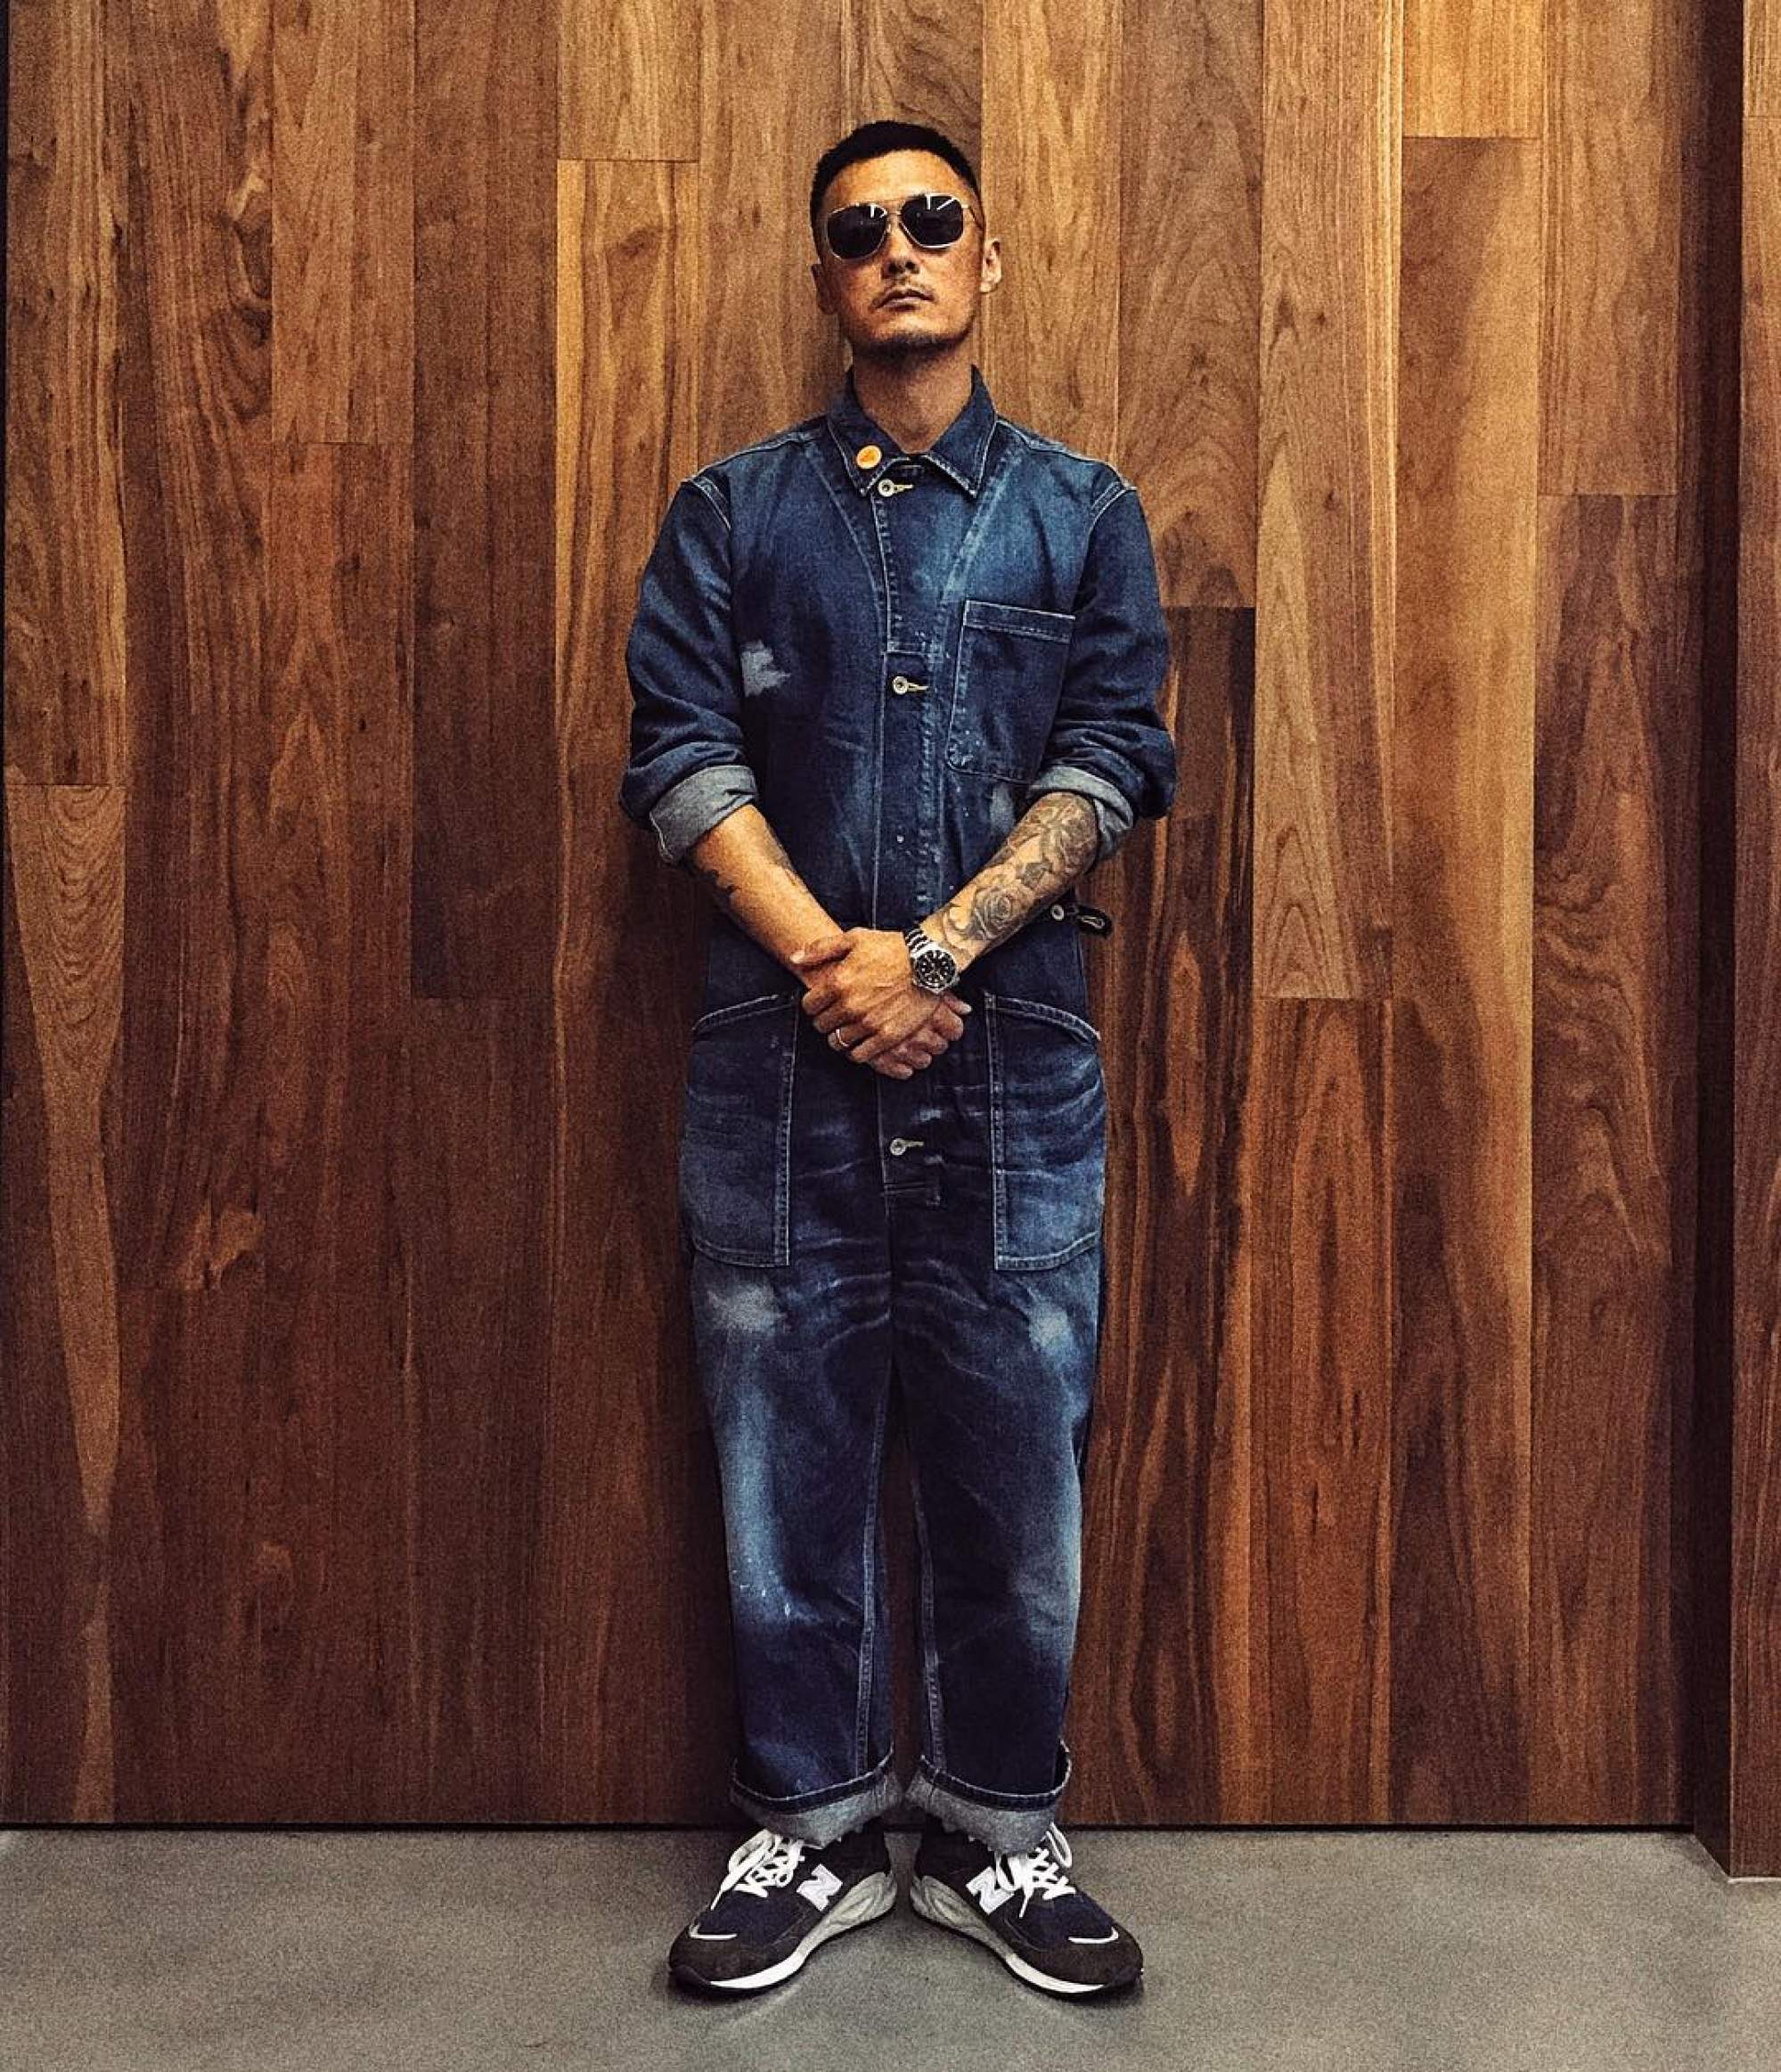 Shawn Yue on Instagram: Louis Vuitton New Tambour Watch